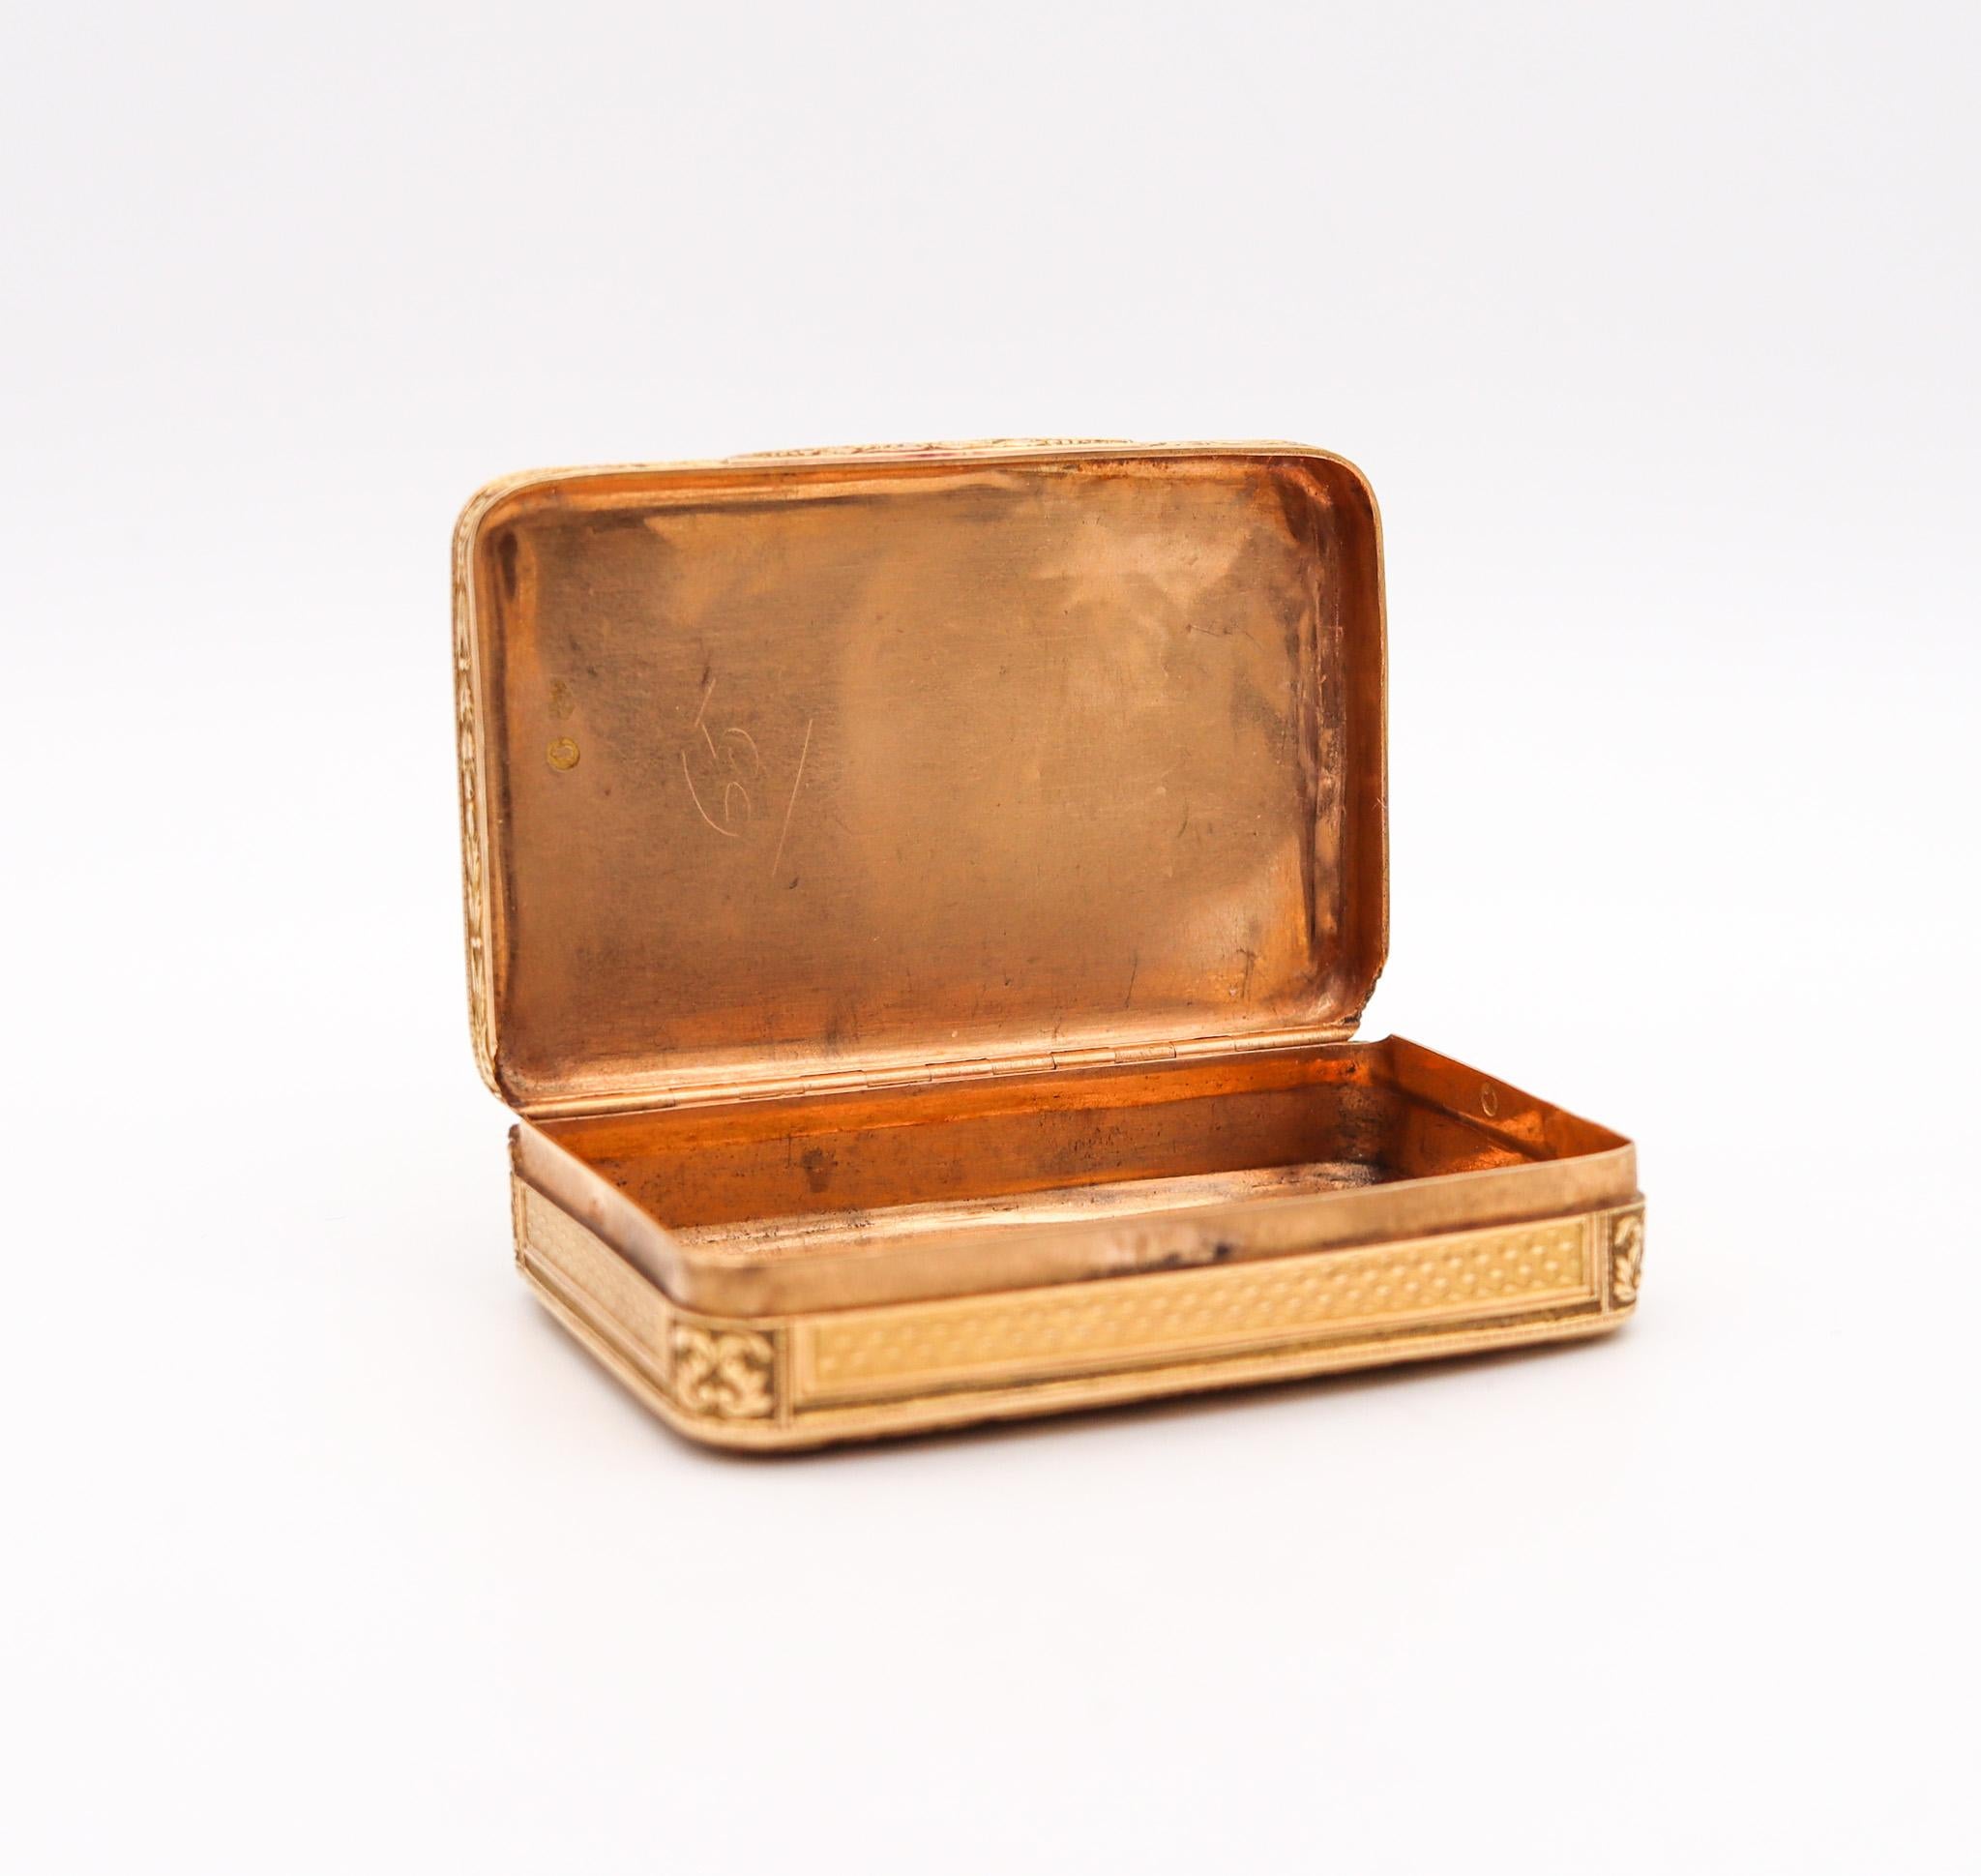 French 1790 Neoclassical Louis XVI Rectangular Snuff Box in Labrated 18kt Gold In Excellent Condition For Sale In Miami, FL